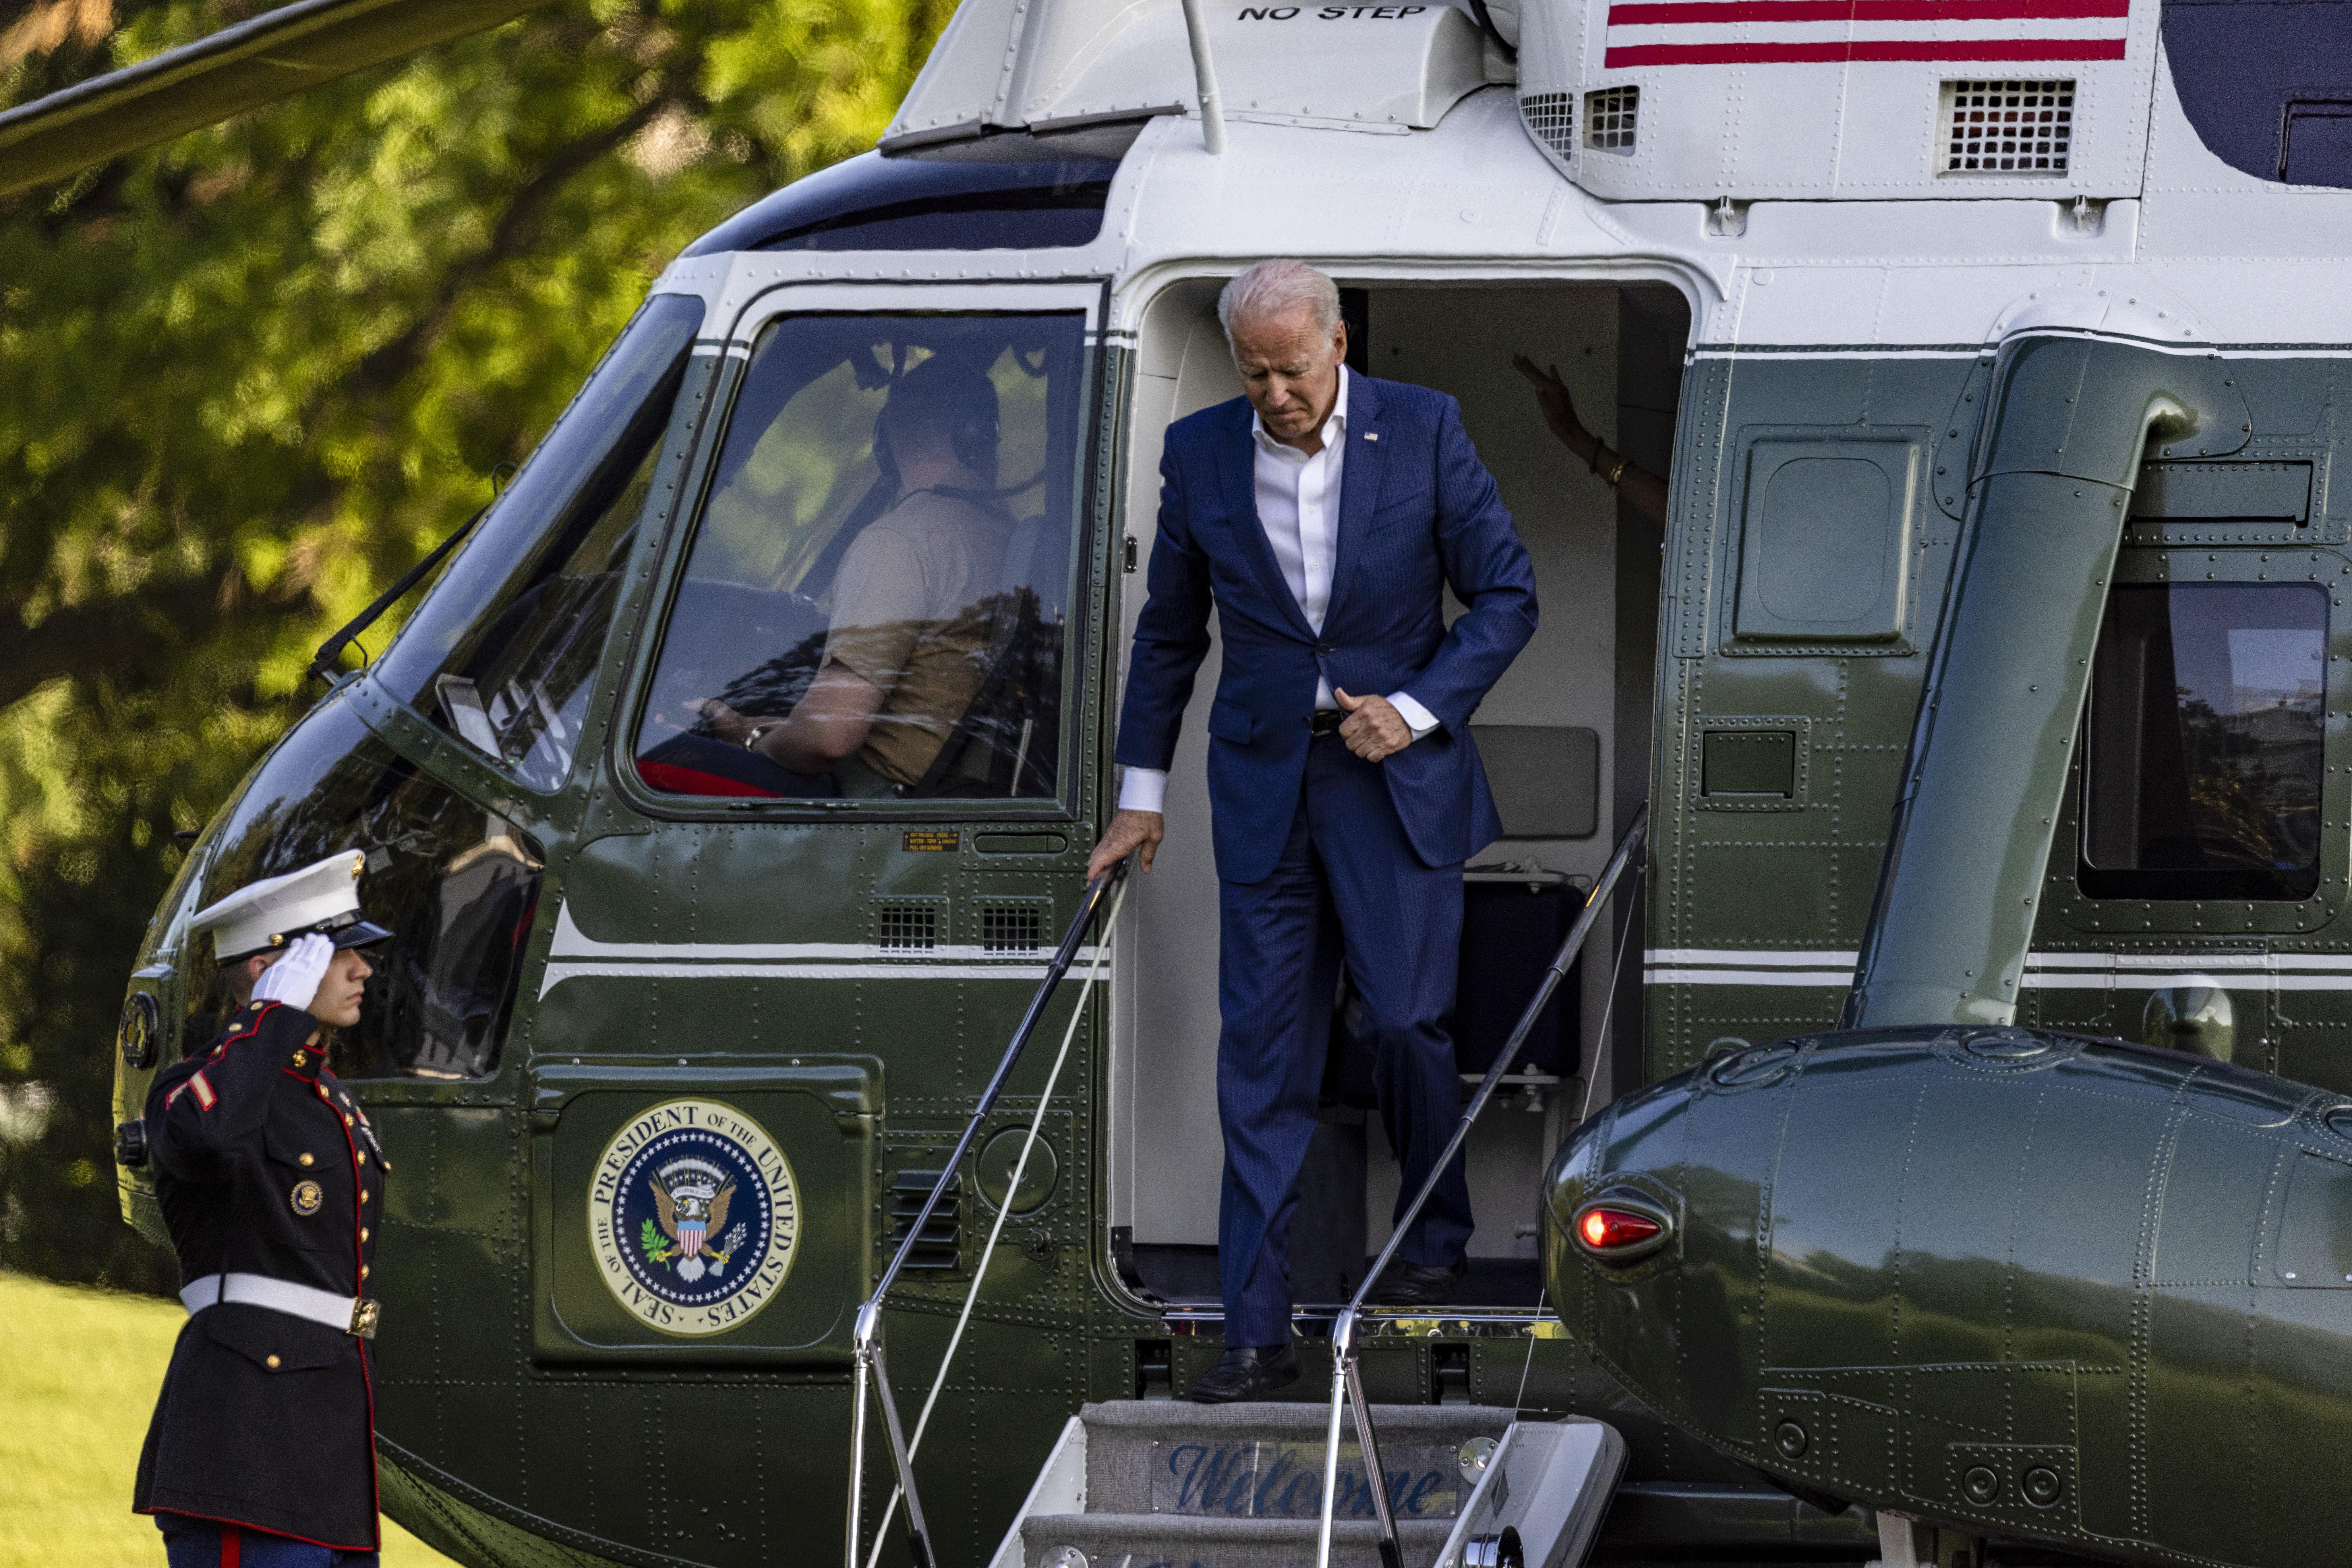 Biden stepping off a helicopter onto a staircase. 